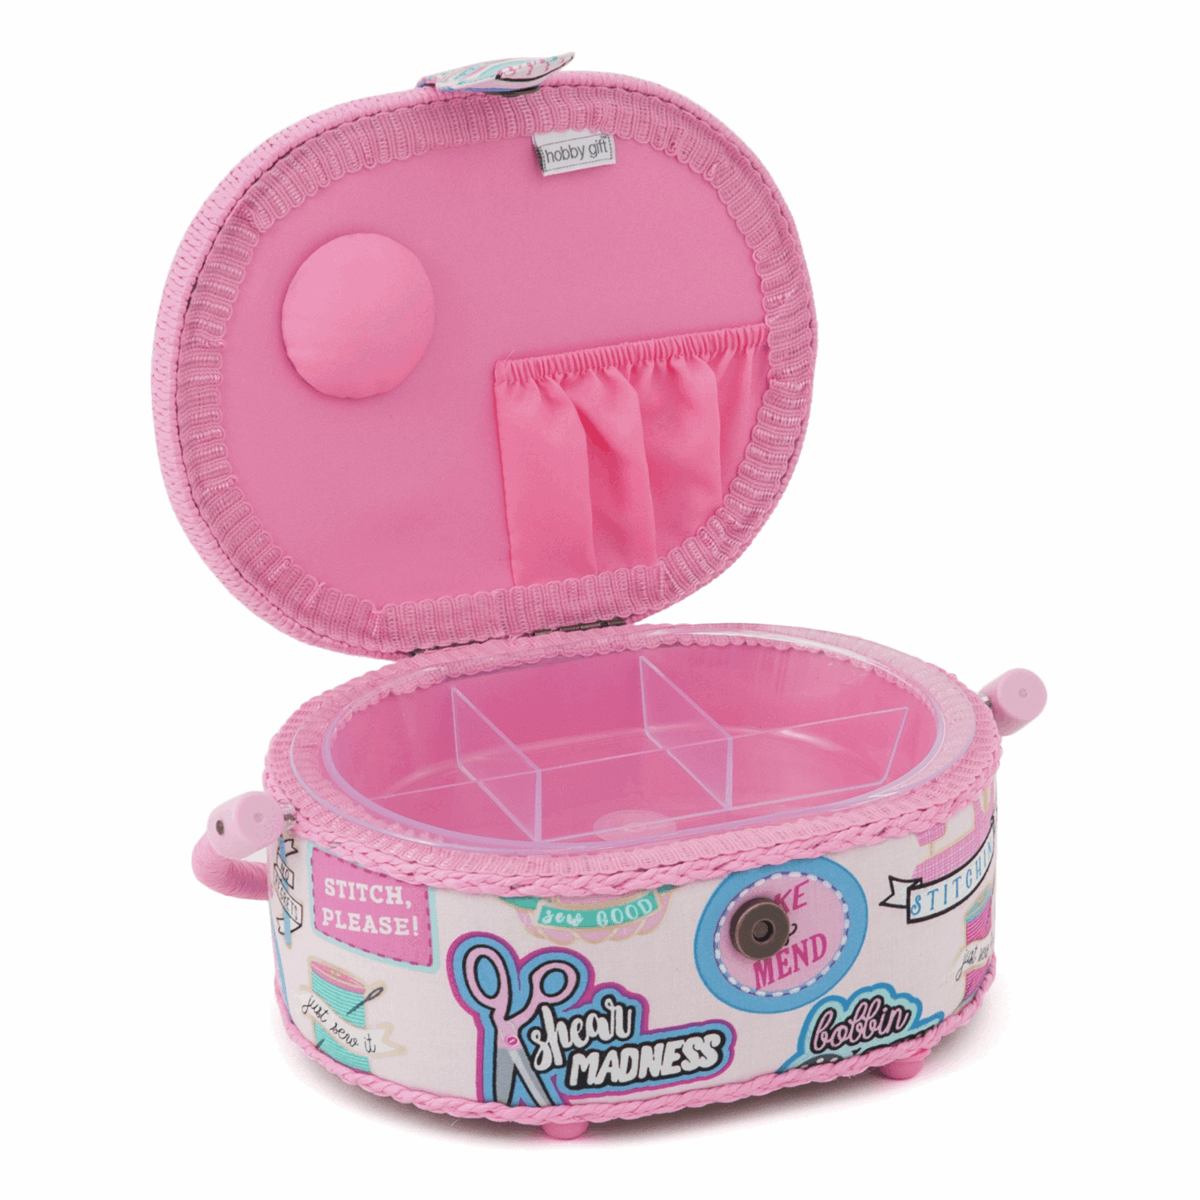 Sew Cool Sewing Box - Small Oval